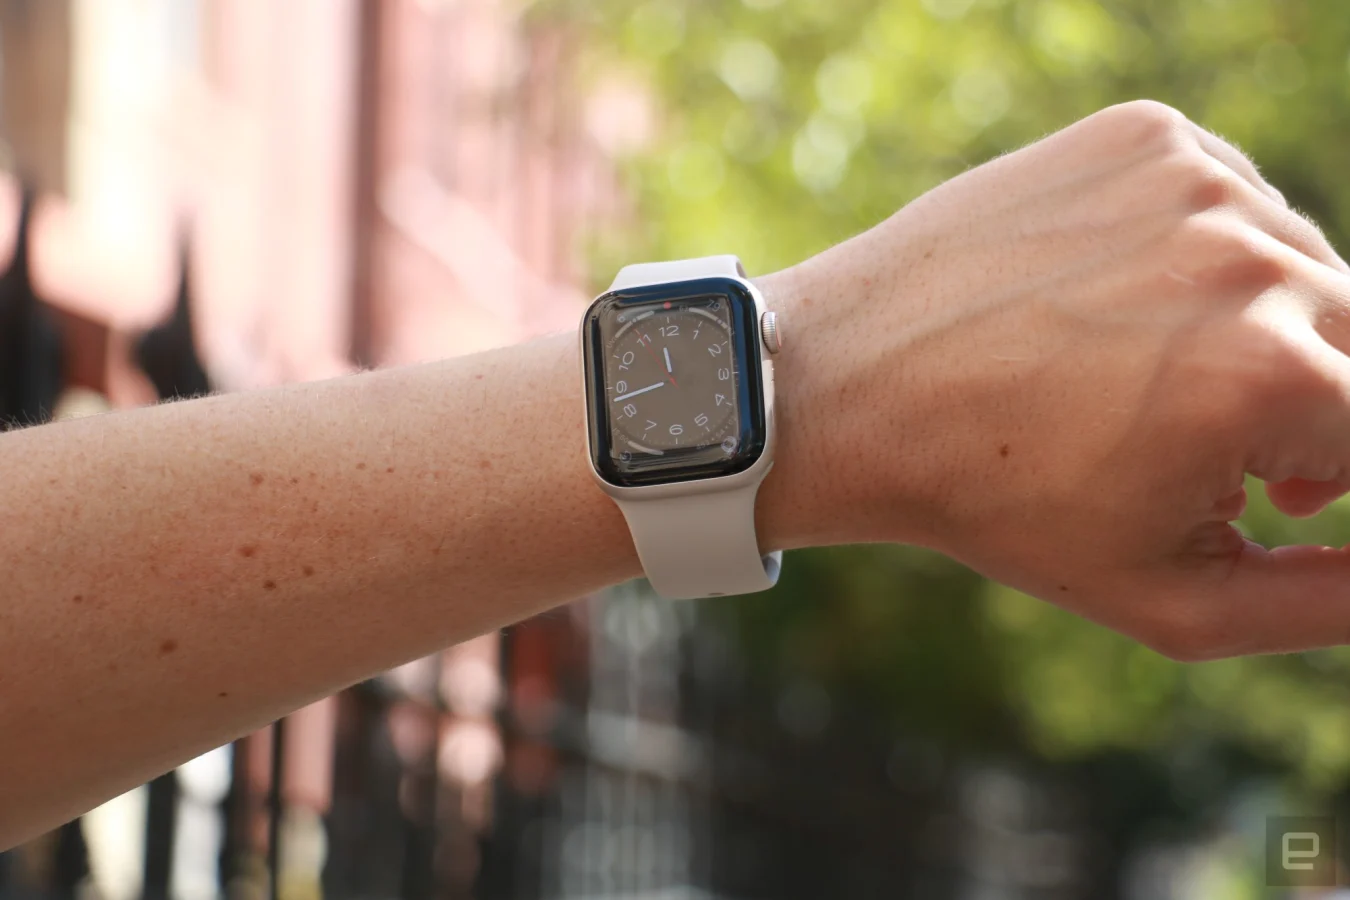 The Apple Watch SE (2022) on a person's wrist held up in front of a red building and a tree.